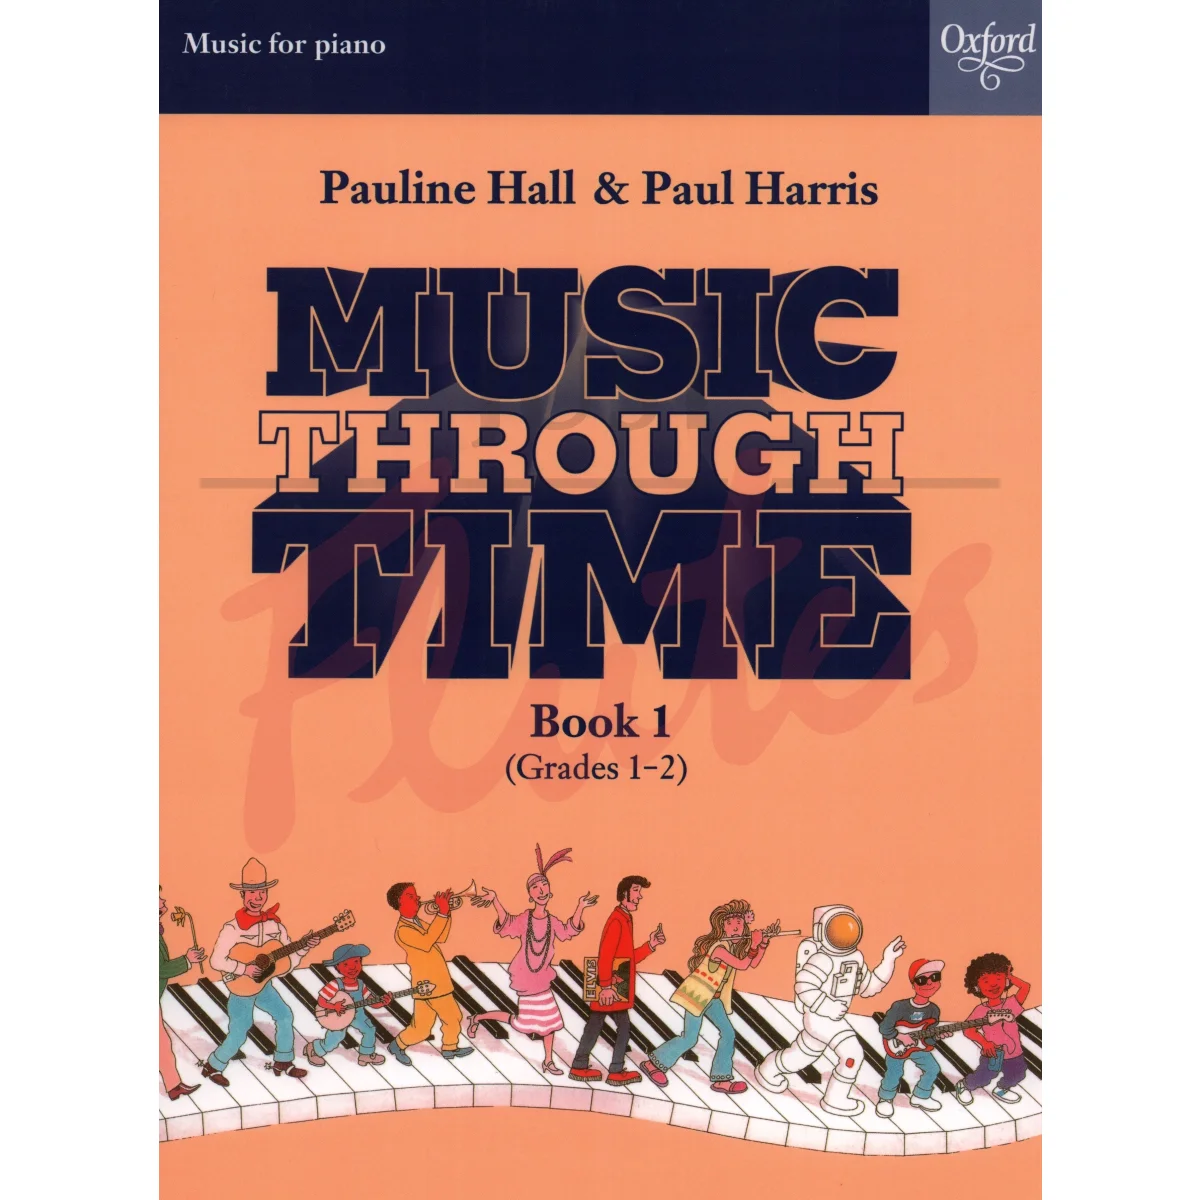 Music Through Time for Piano, Book 1